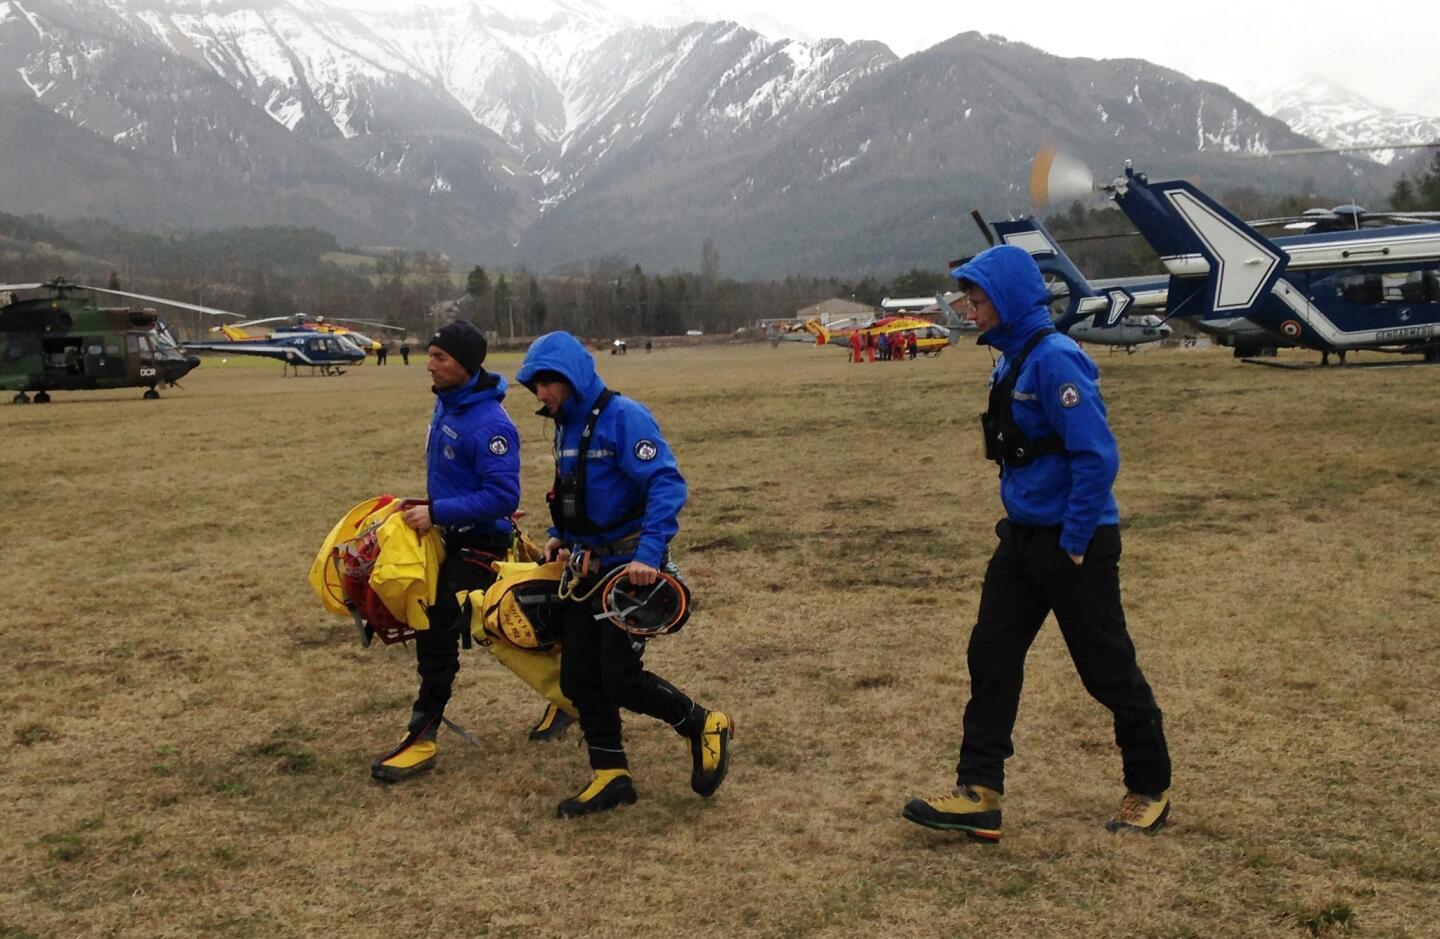 Germanwings plane crashes in French Alps